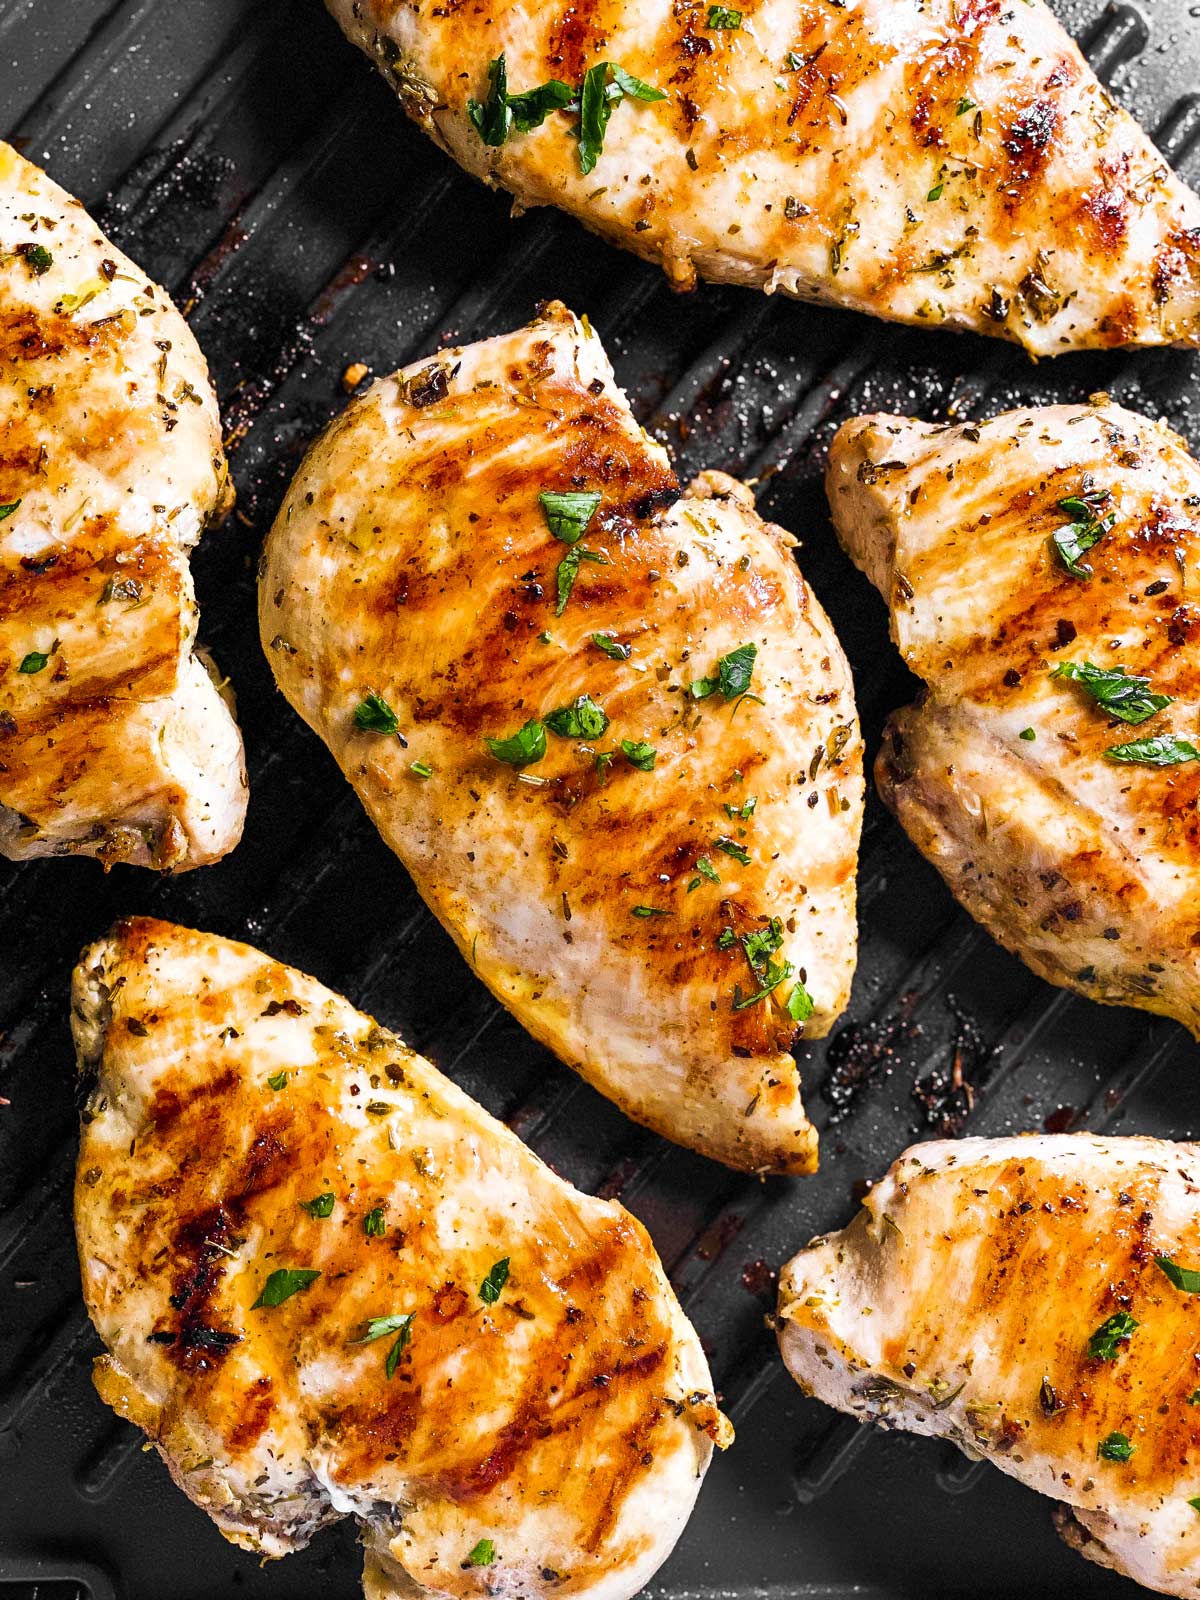 https://www.savorynothings.com/wp-content/uploads/2022/01/grilled-chicken-breast-recipe-image-7.jpg